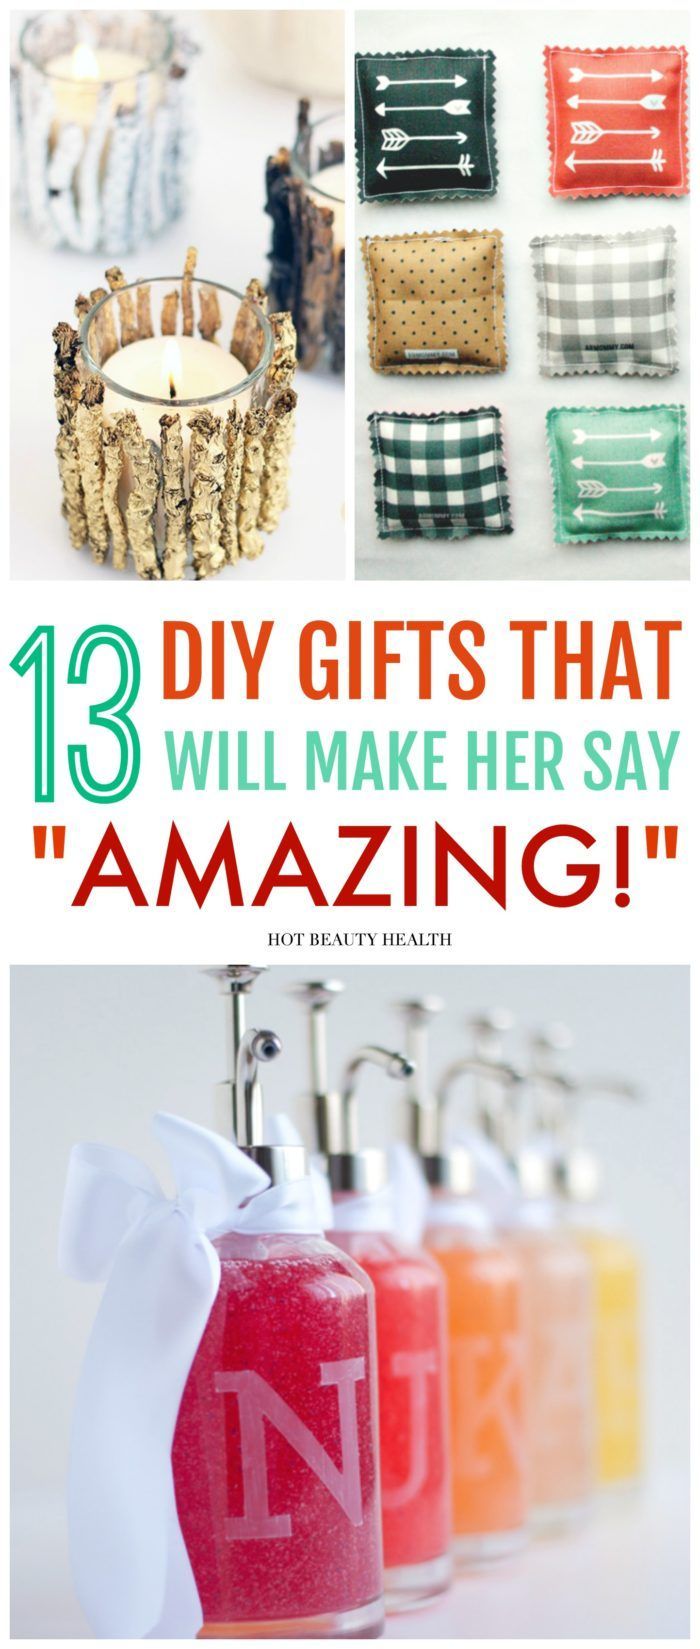 17 diy Gifts for women ideas